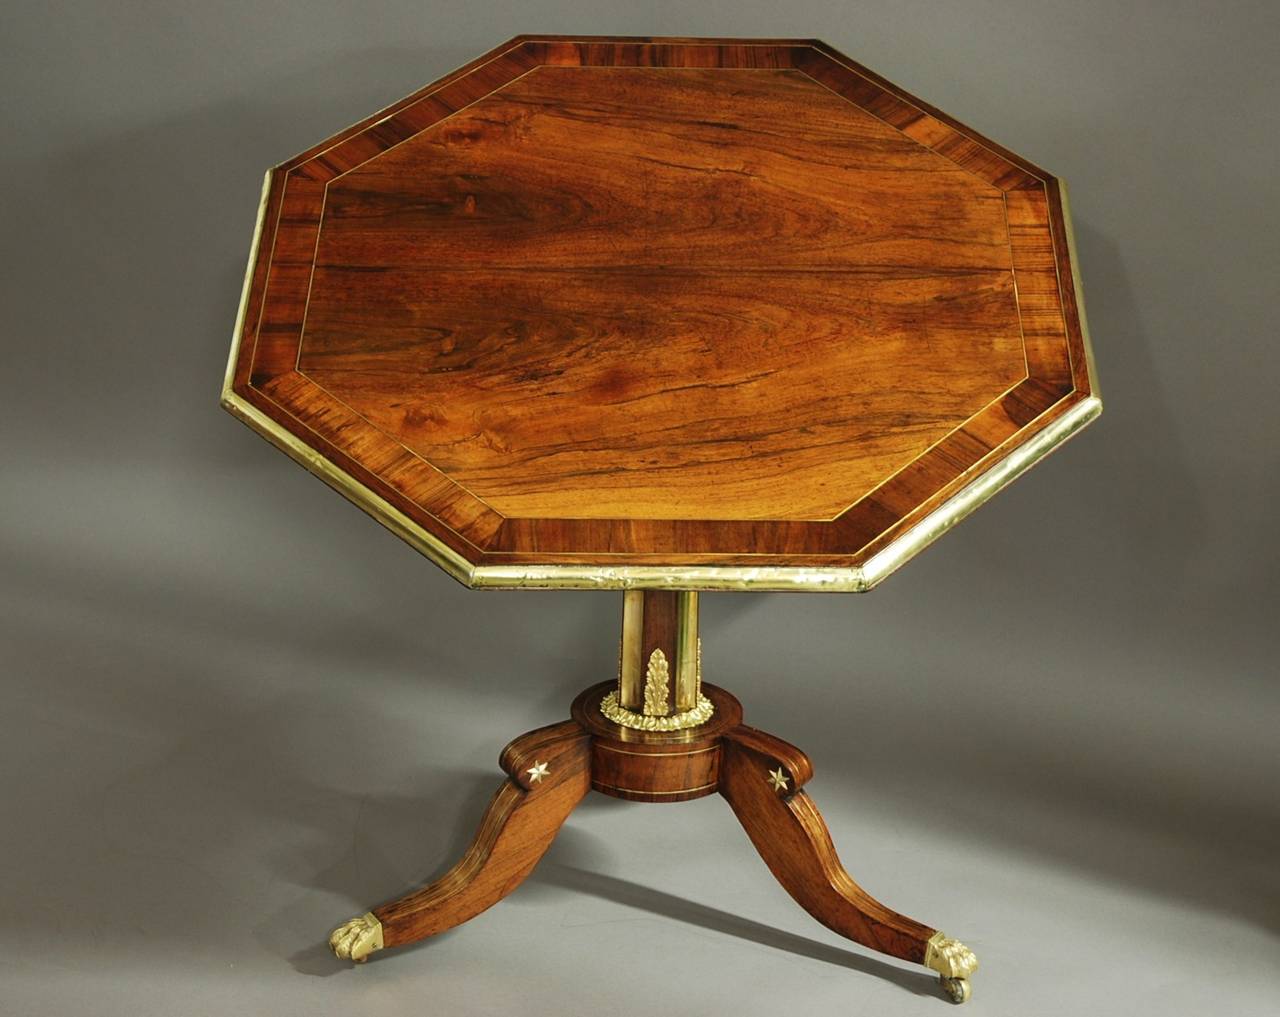 A rare early 19th century Regency tilt top rosewood centre table of octagonal form.

This table has a sophisticated design, has a superb patina (colour) and is in very good condition.
 
The table consists of mirrored rosewood veneers to the top